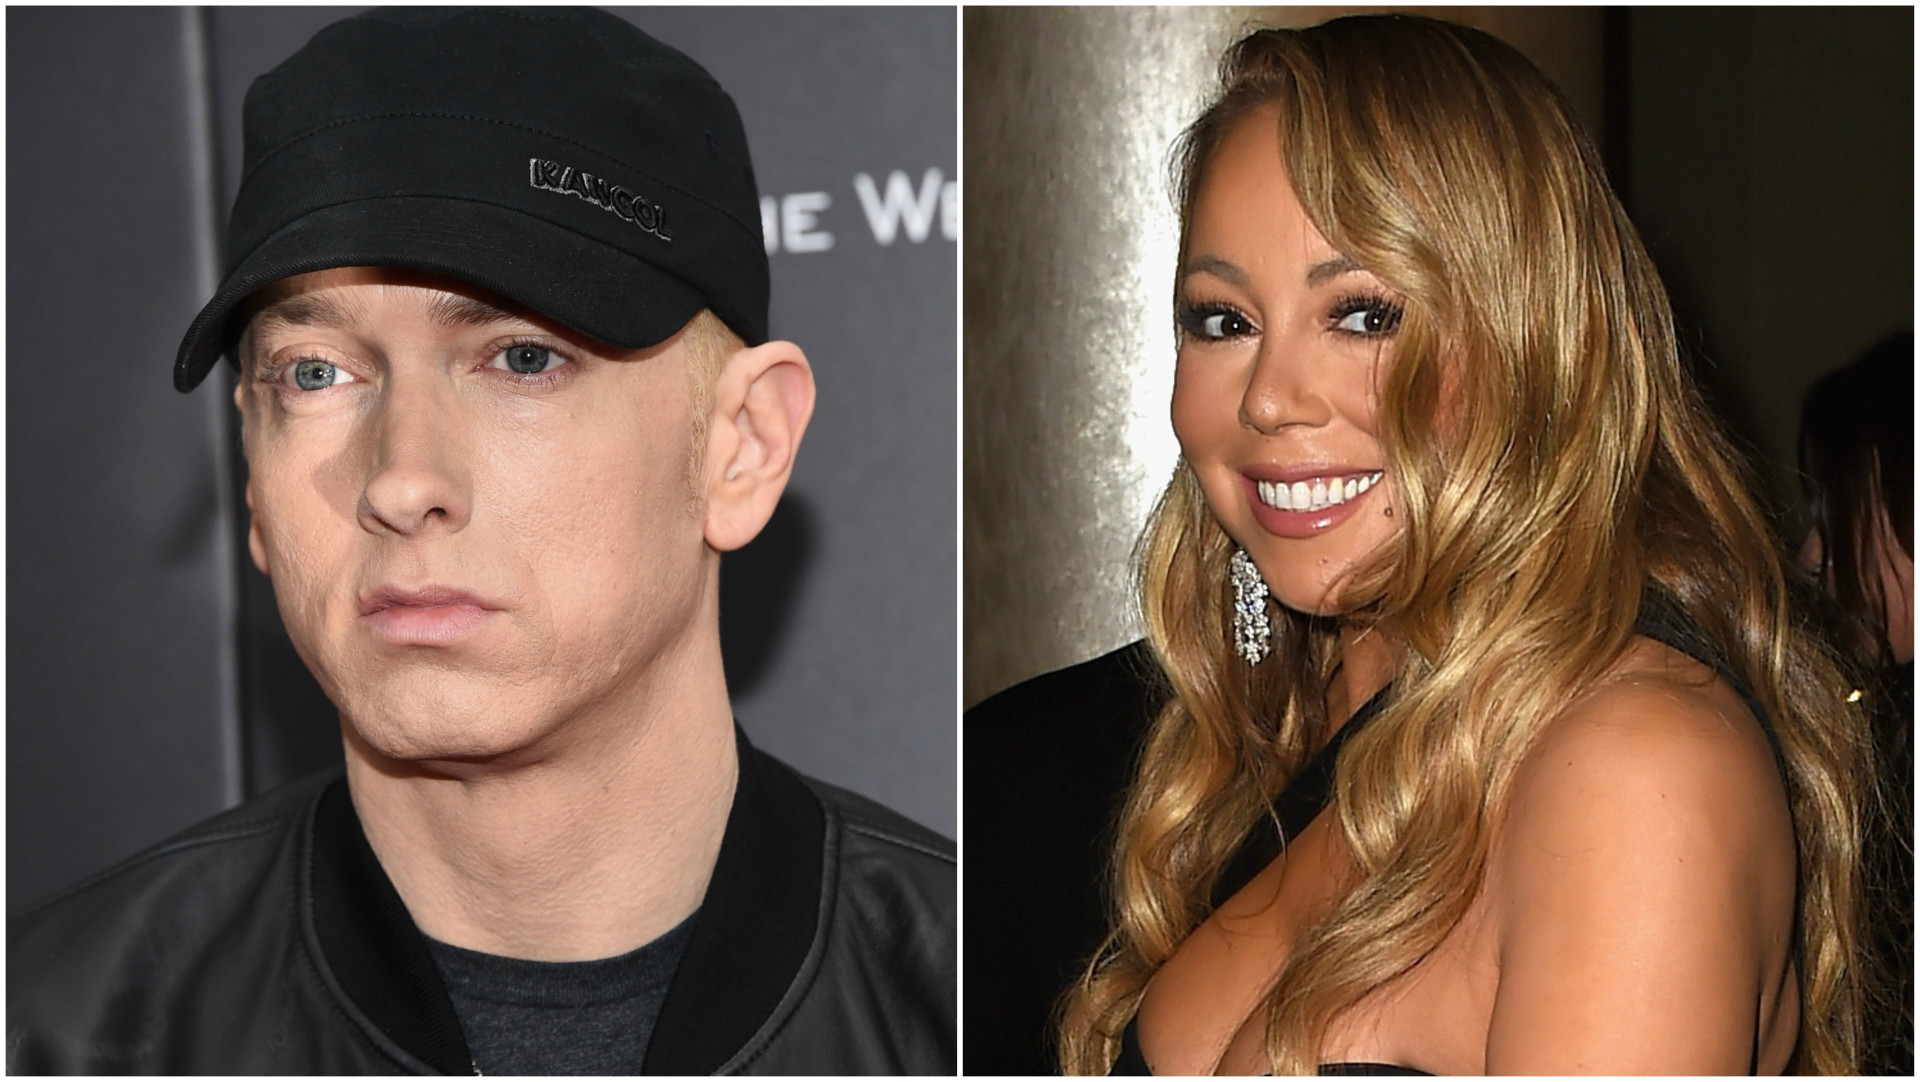 <p>According to Complex, the rapper has made multiple mentions of his relationship with Carey in his songs. The singer, on the other hand, is said to have believed that he was simply fixated on her, leading her to create a song titled 'Clown' in retaliation to Eminem.</p><p>You may also like:<a href="https://www.starsinsider.com/n/493882?utm_source=msn.com&utm_medium=display&utm_campaign=referral_description&utm_content=570915en-en"> Celebs who were rejected by other stars</a></p>